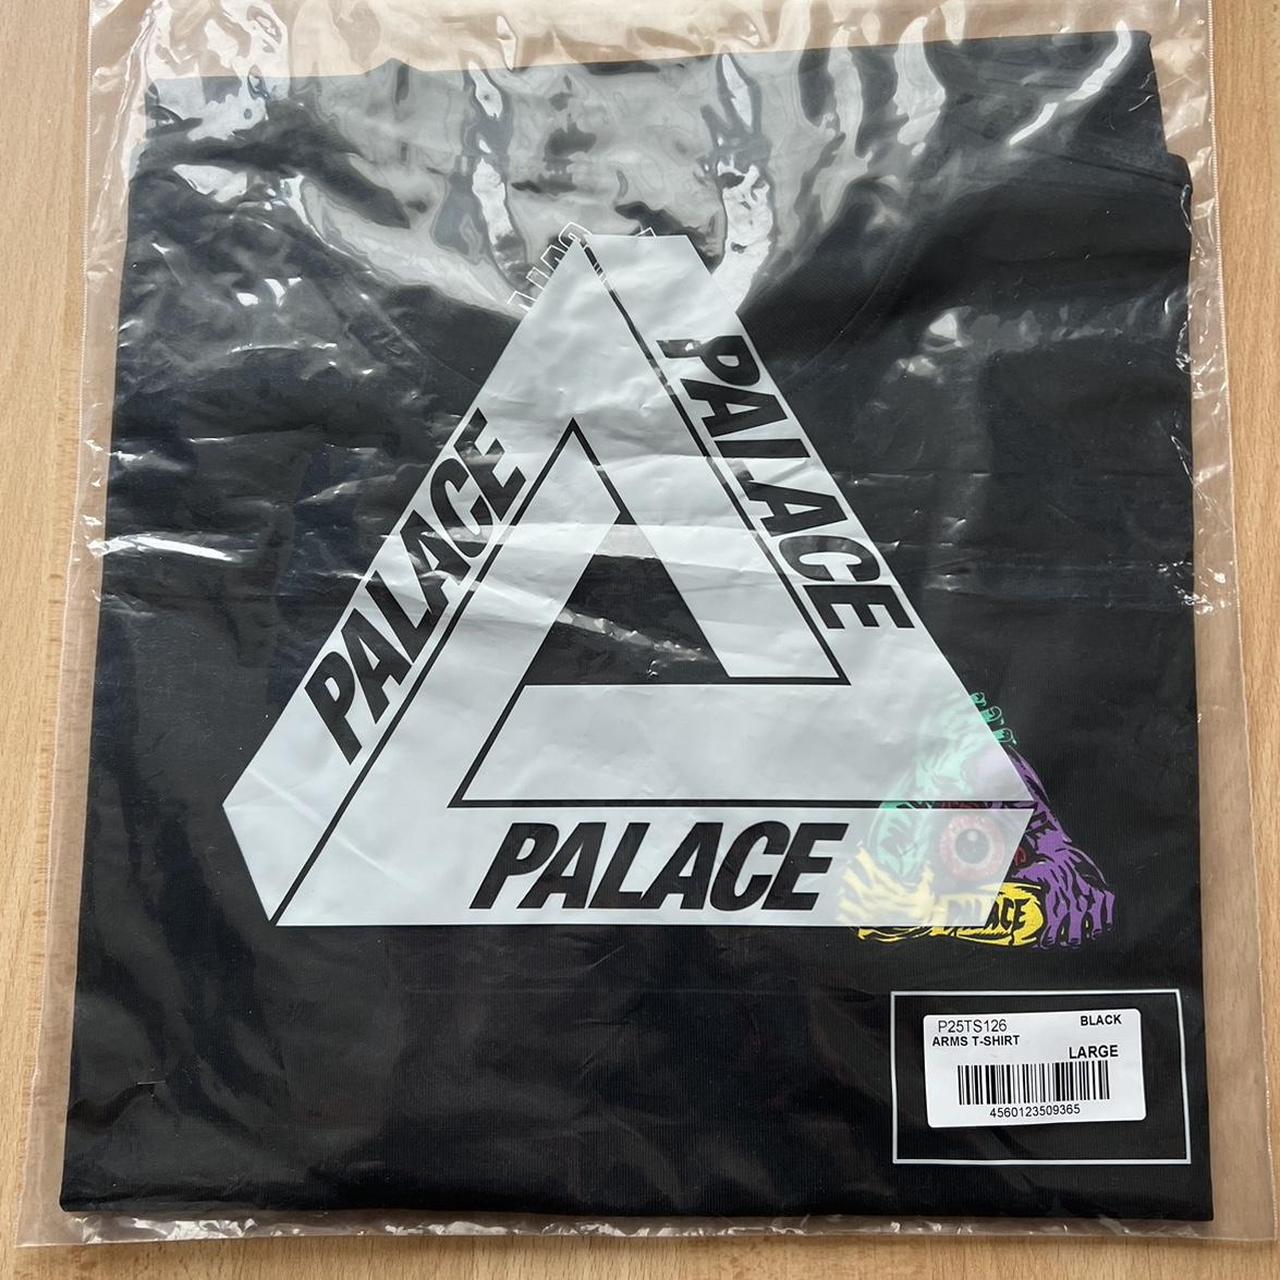 Palace arms t-shirt, Black, Large, Brand new in...